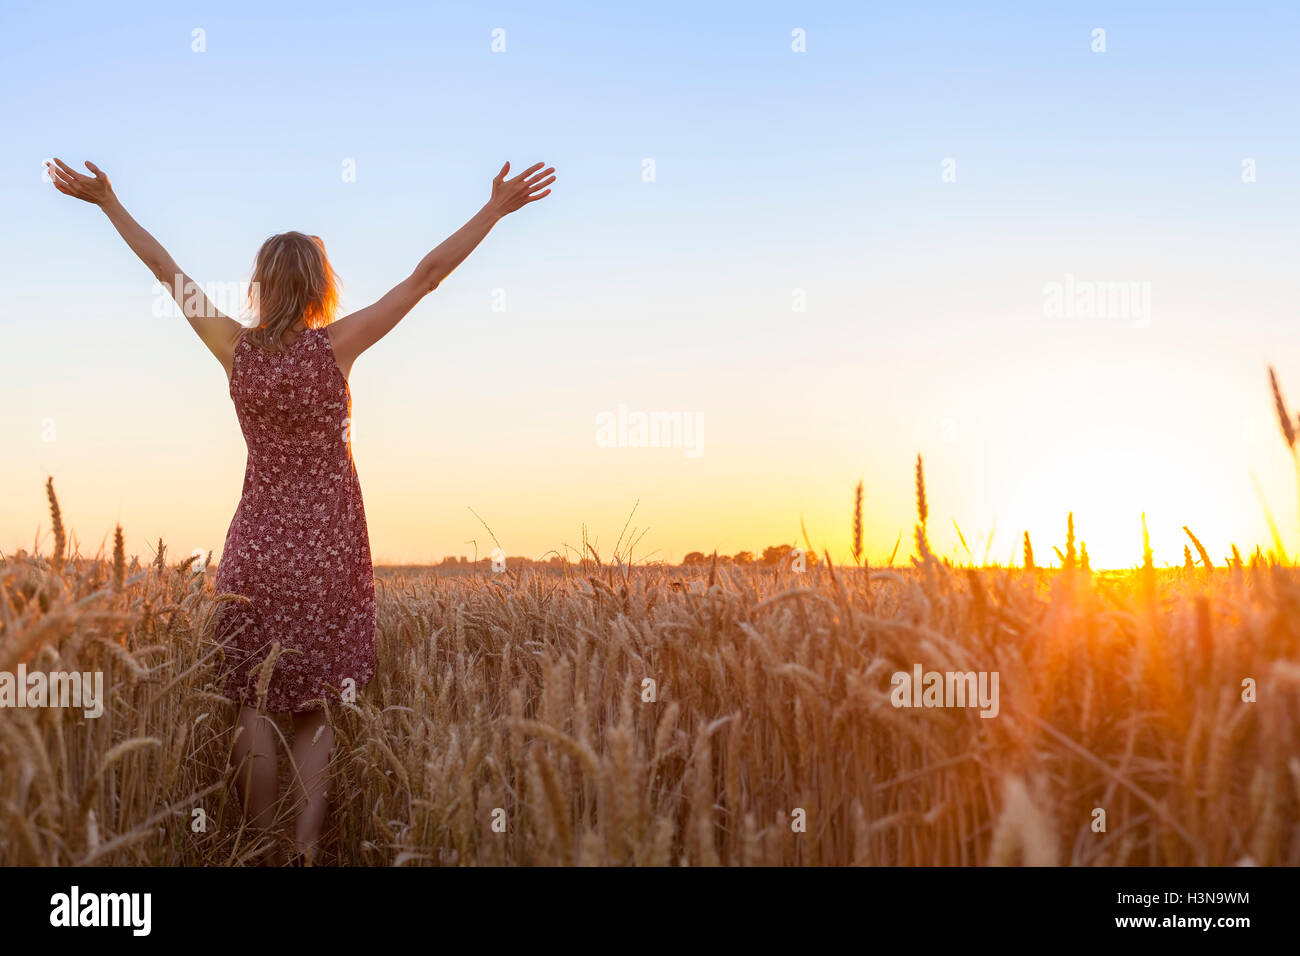 Happy positive woman full of vitality raising hands and facing the sun in a wheat field at sunrise Stock Photo